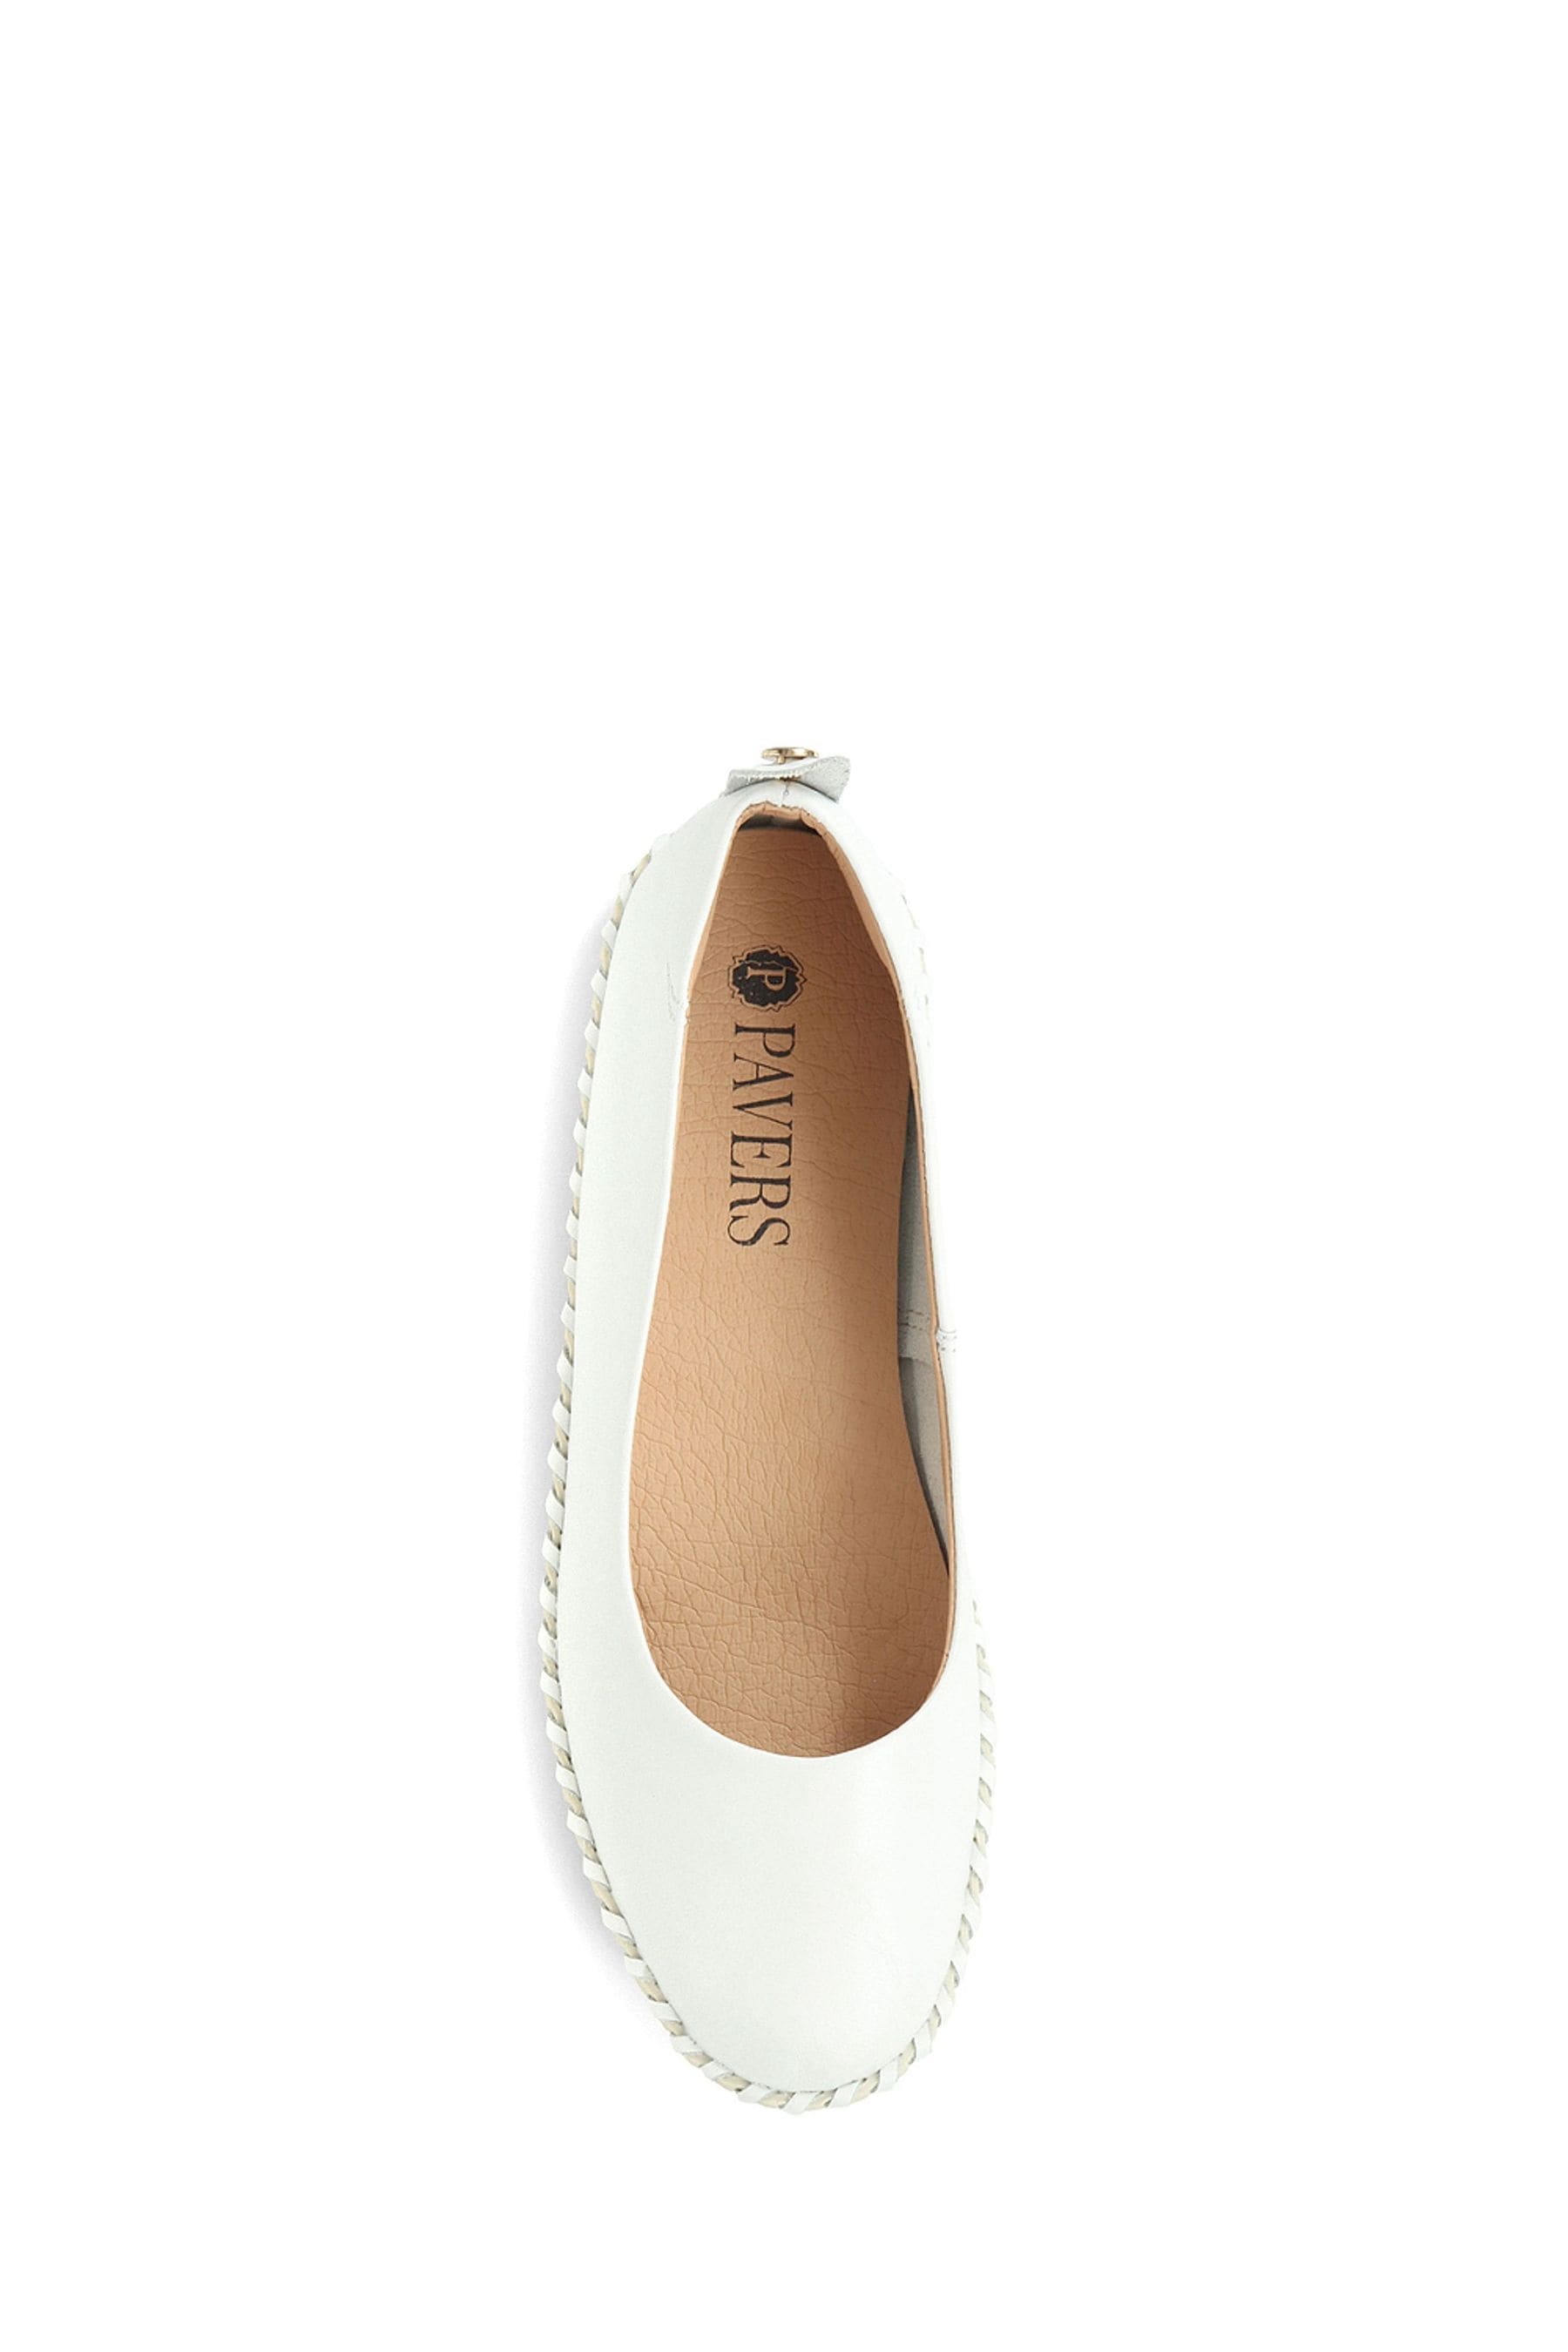 Buy Pavers White Leather Ballet Pumps from the Next UK online shop